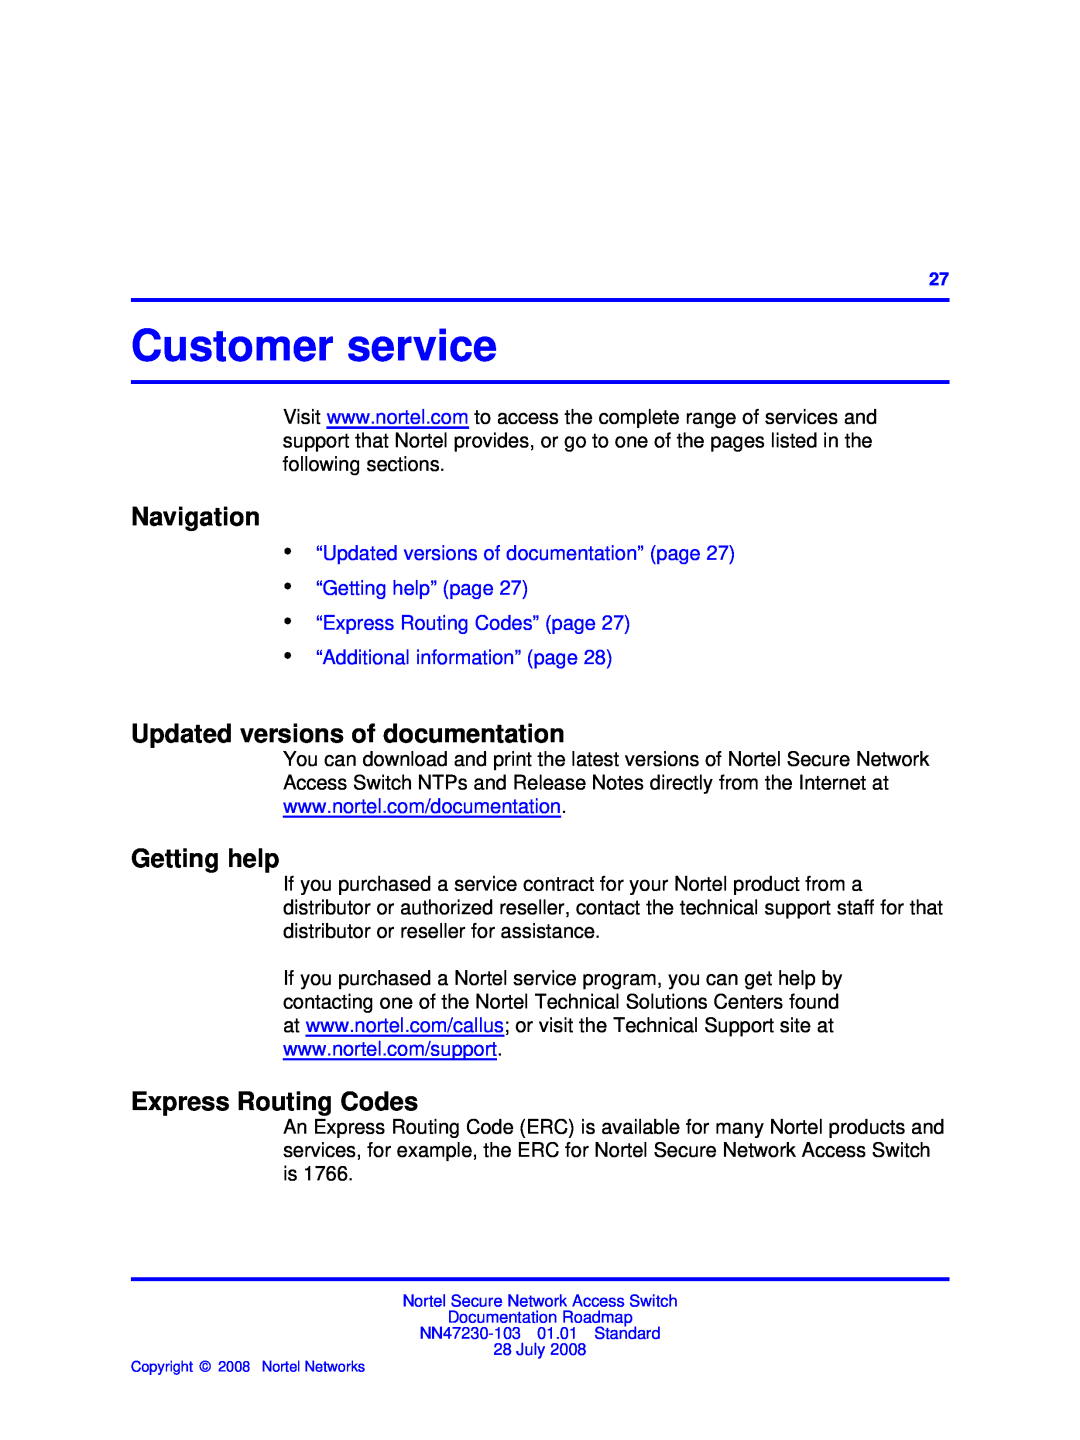 Nortel Networks NN47230-103 manual Customer service, Updated versions of documentation, Getting help, Express Routing Codes 